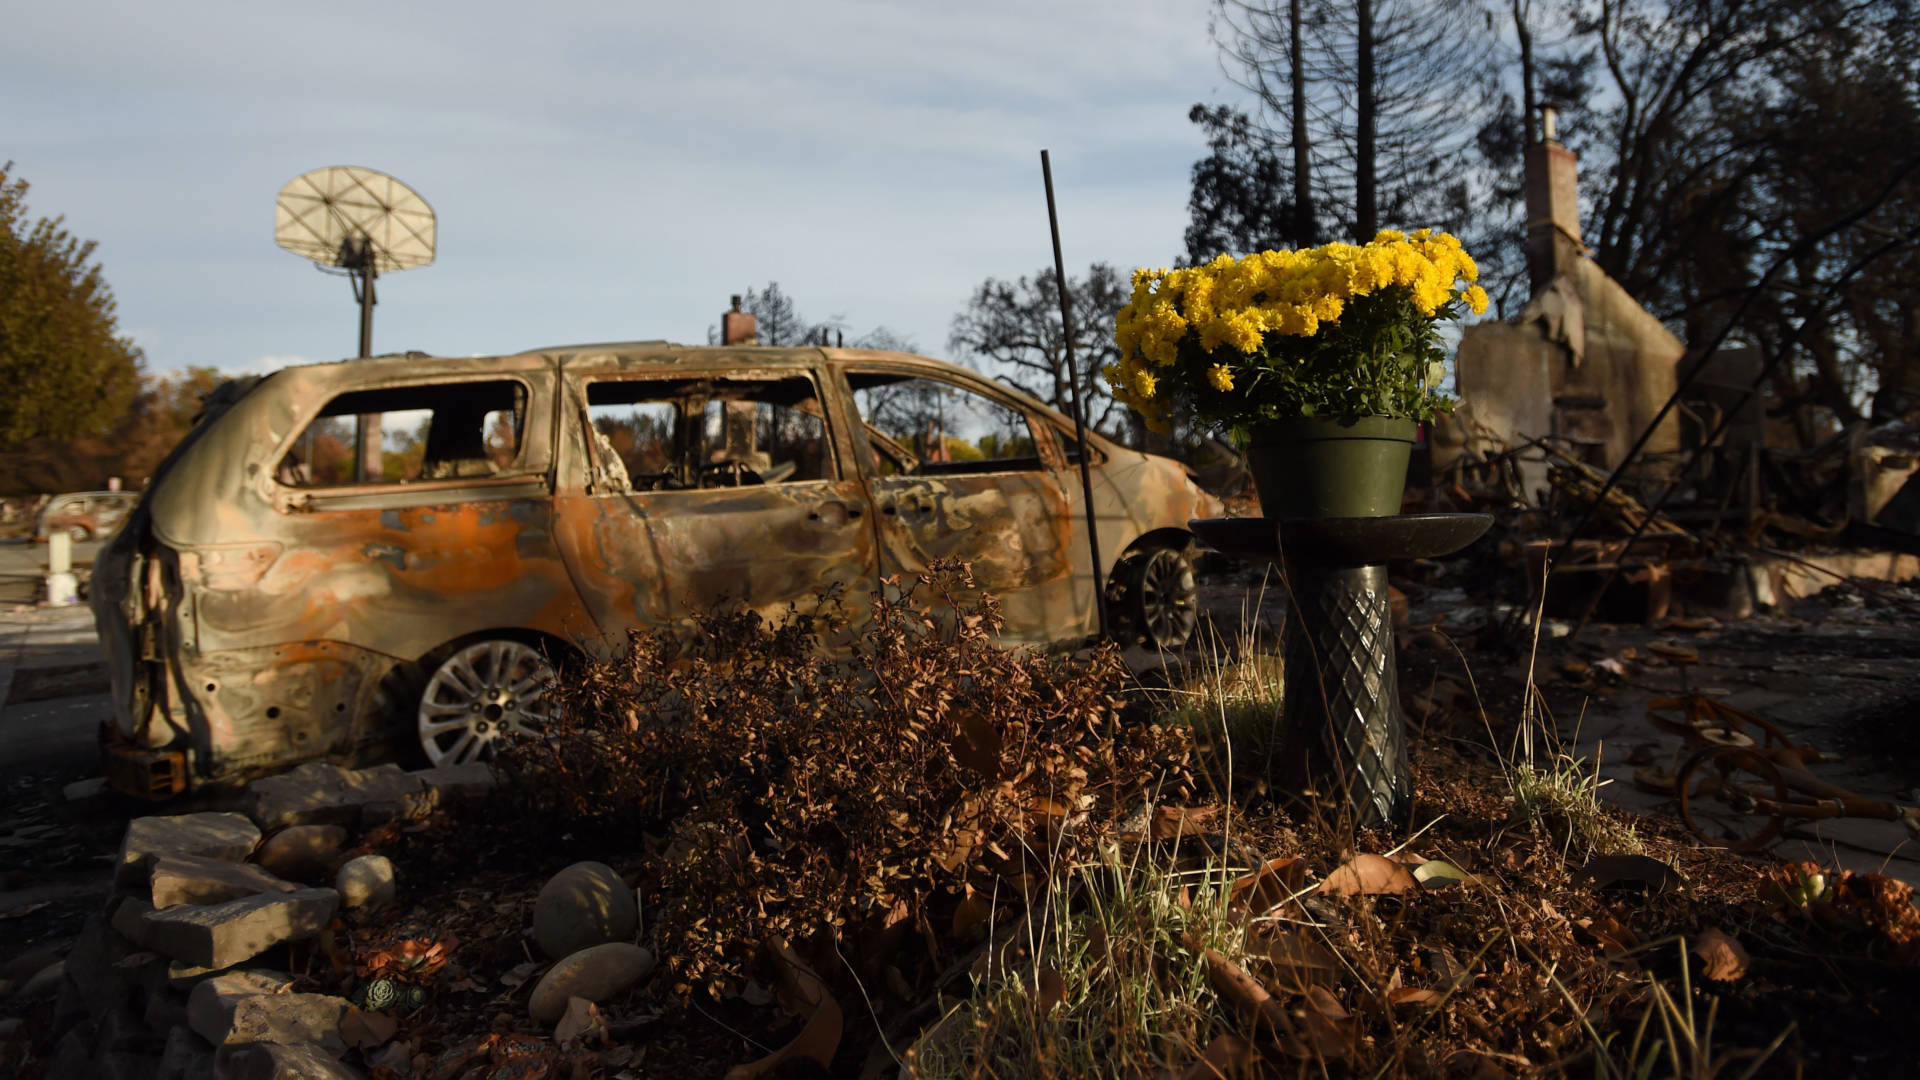 Fresh flowers are seen at a burned residence in the Coffey Park area of Santa Rosa, California on Oct. 20, 2017. JOSH EDELSON/AFP/Getty Images